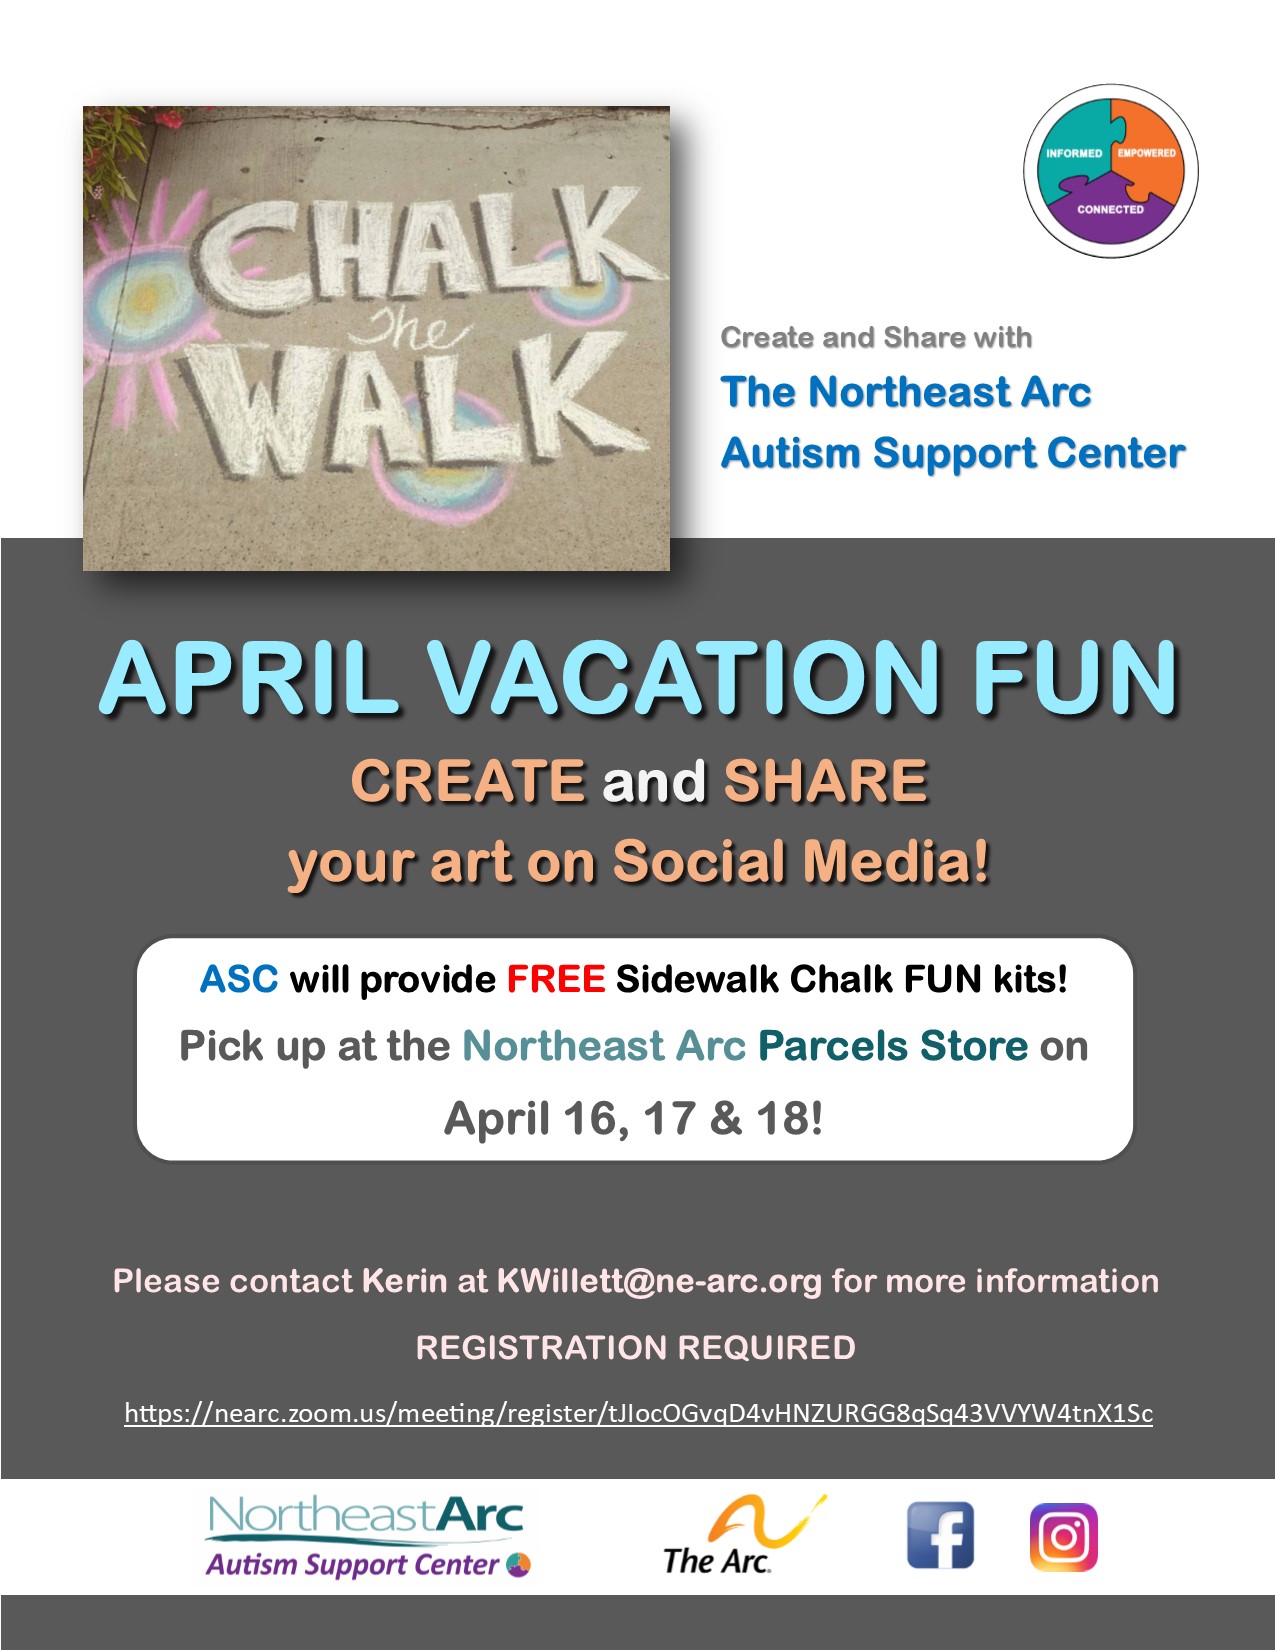 Flyer for ASC Fun April Vacation Event - Chalk the Walk, the Autism Support Center is offering free chalk kits for families to decorate there walkway and post on social media! Contact Kerin at KWillett@ne-arc.org for more information.